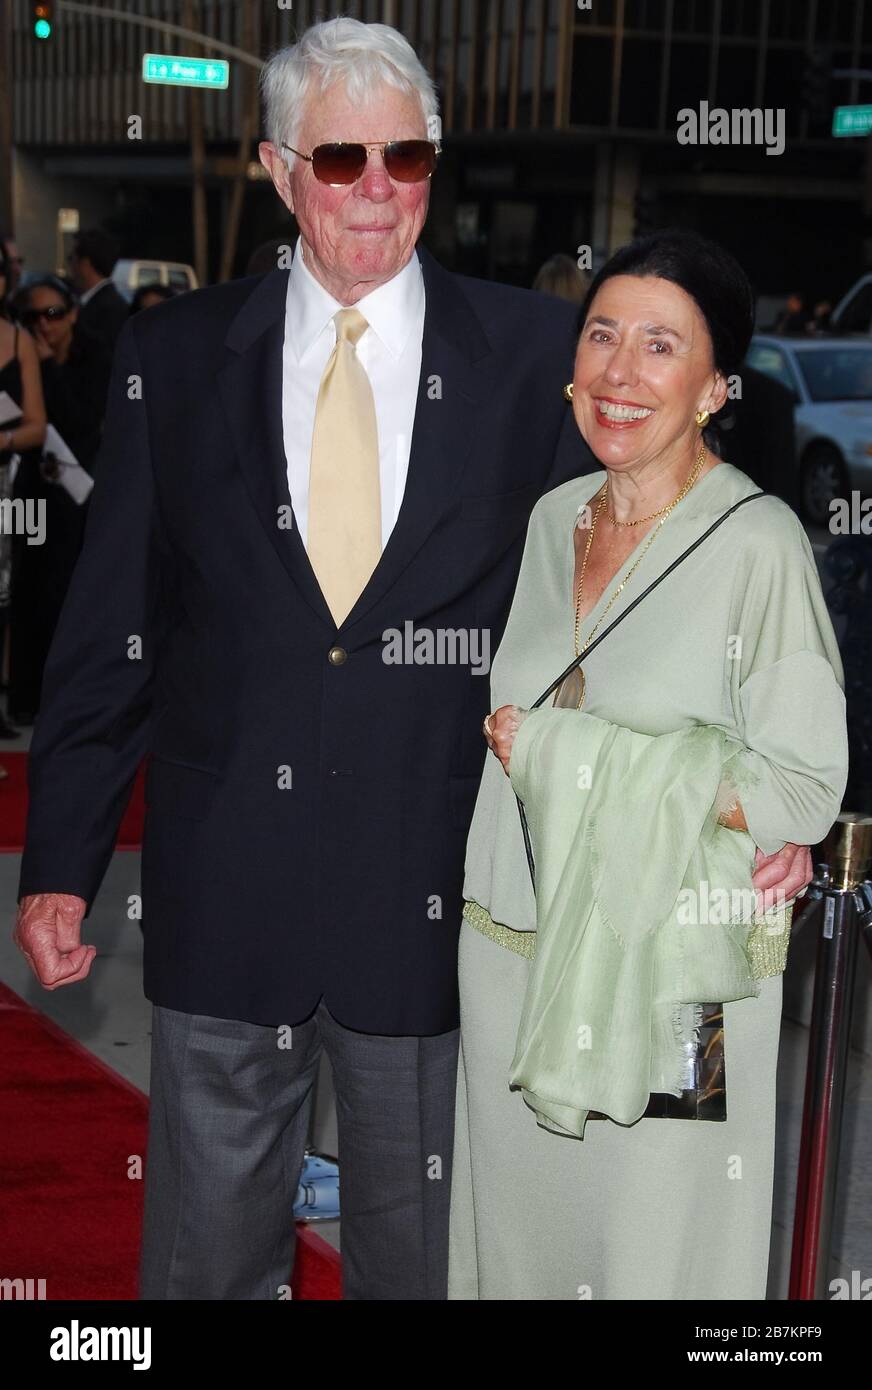 Peter Graves and Wife Joan at the Los Angeles Premiere of 'Hollywoodland' held at the Academy of Motion Picture Arts and Sciences in Beverly Hills, CA. The event took place on Thursday, September 7, 2006.  Photo by: SBM / PictureLux - File Reference # 33984-6851SBMPLX Stock Photo